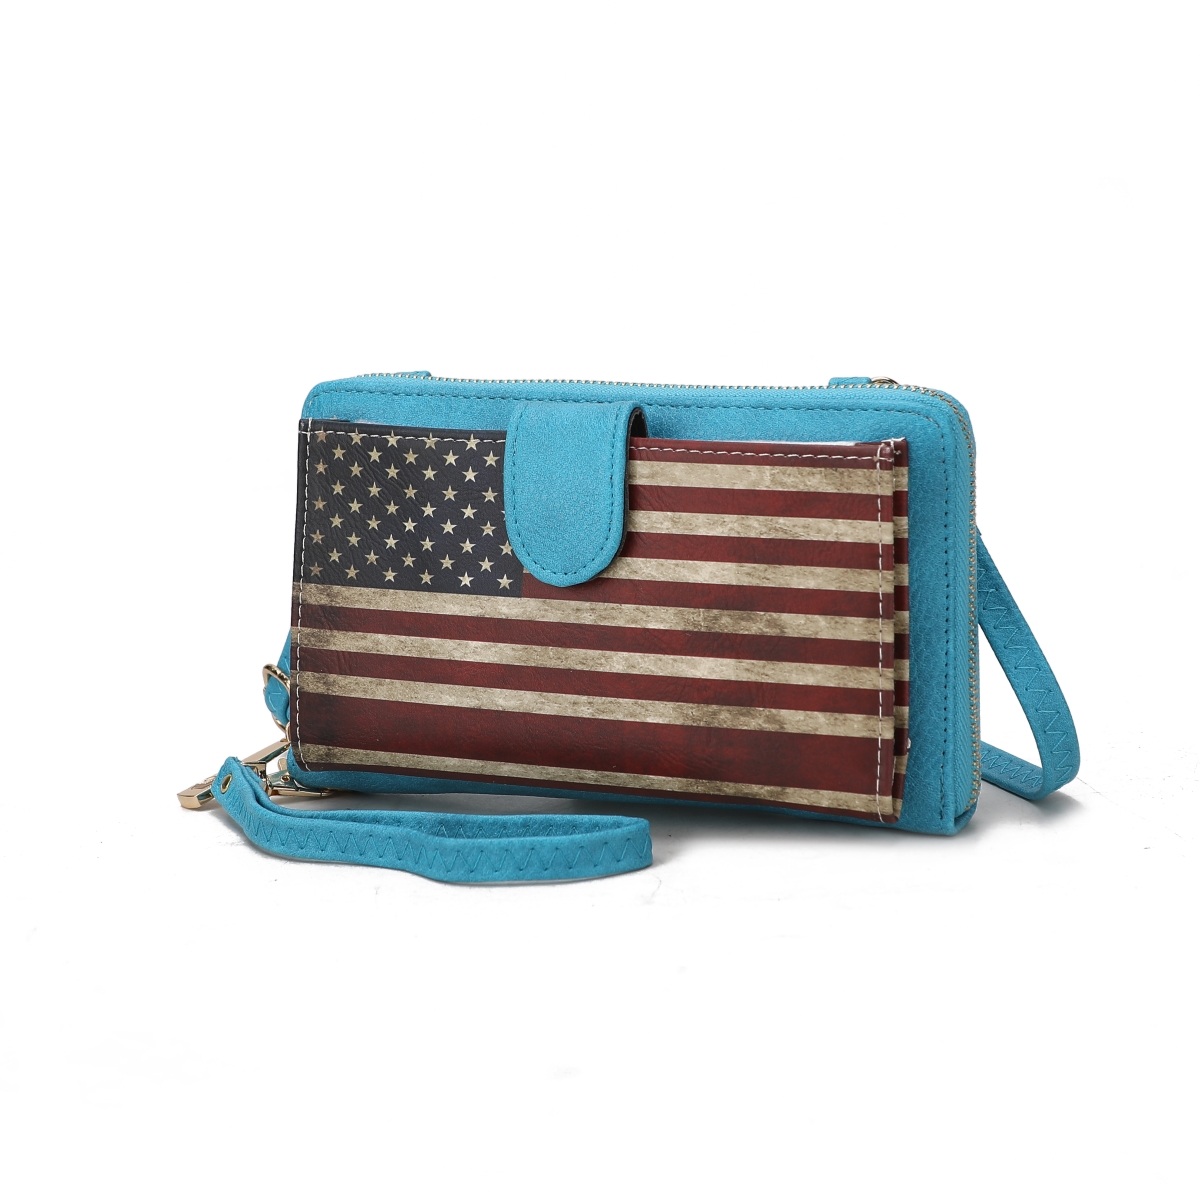 Picture of MKF Collection by Mia K. MKF-FG7406TQ Kiara Smartphone and Wallet Convertible FLAG Crossbody Bag